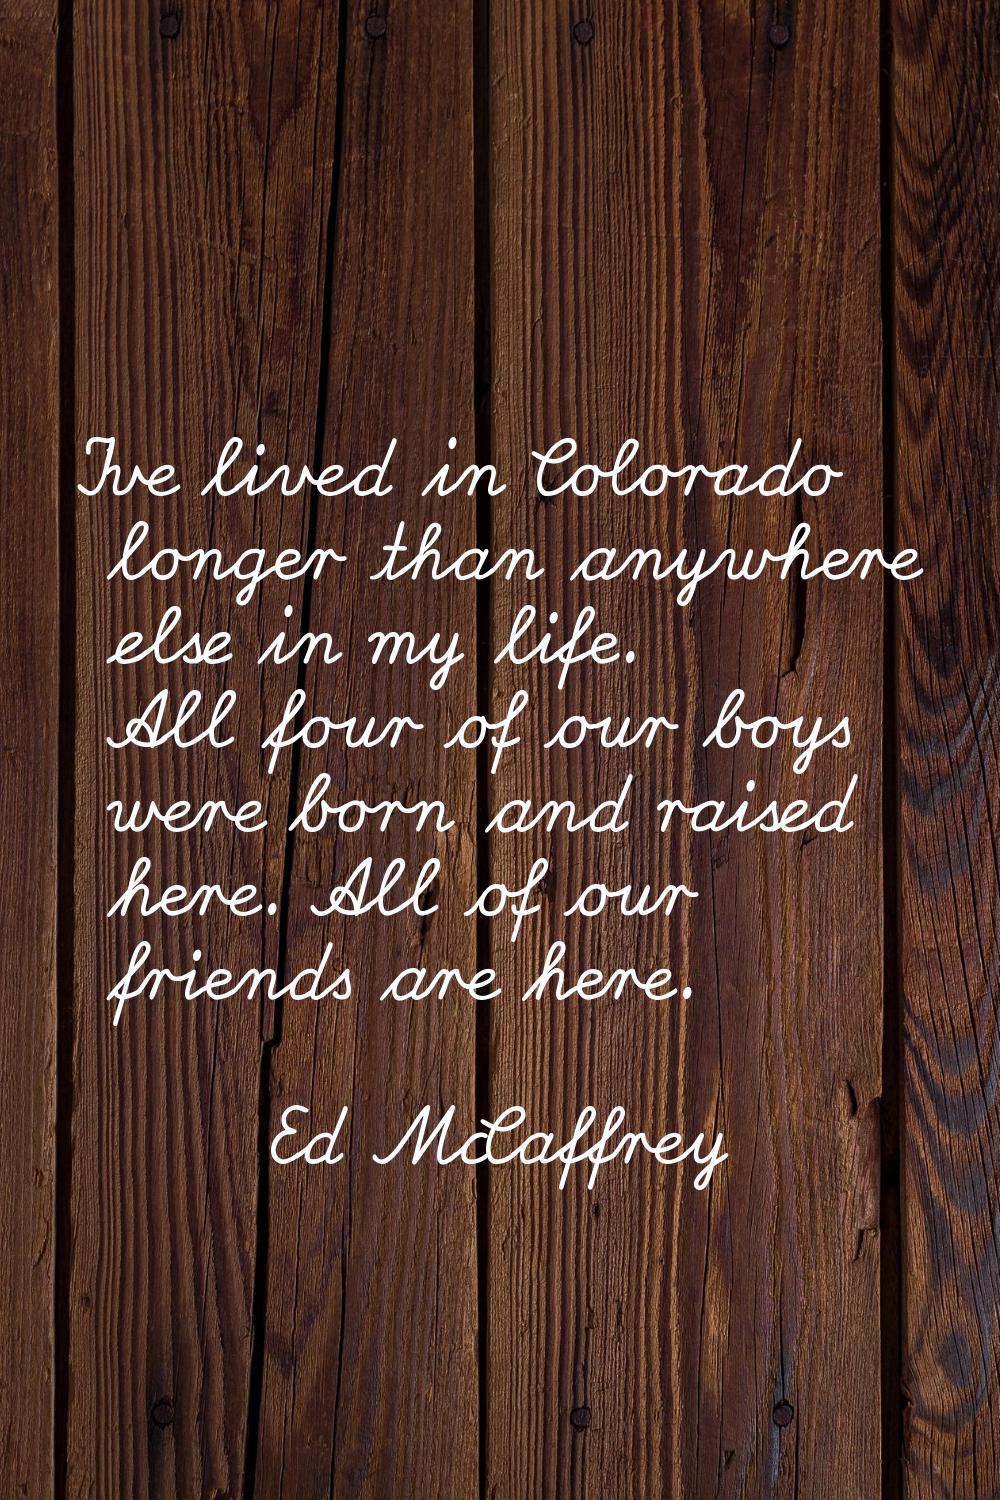 I've lived in Colorado longer than anywhere else in my life. All four of our boys were born and rai